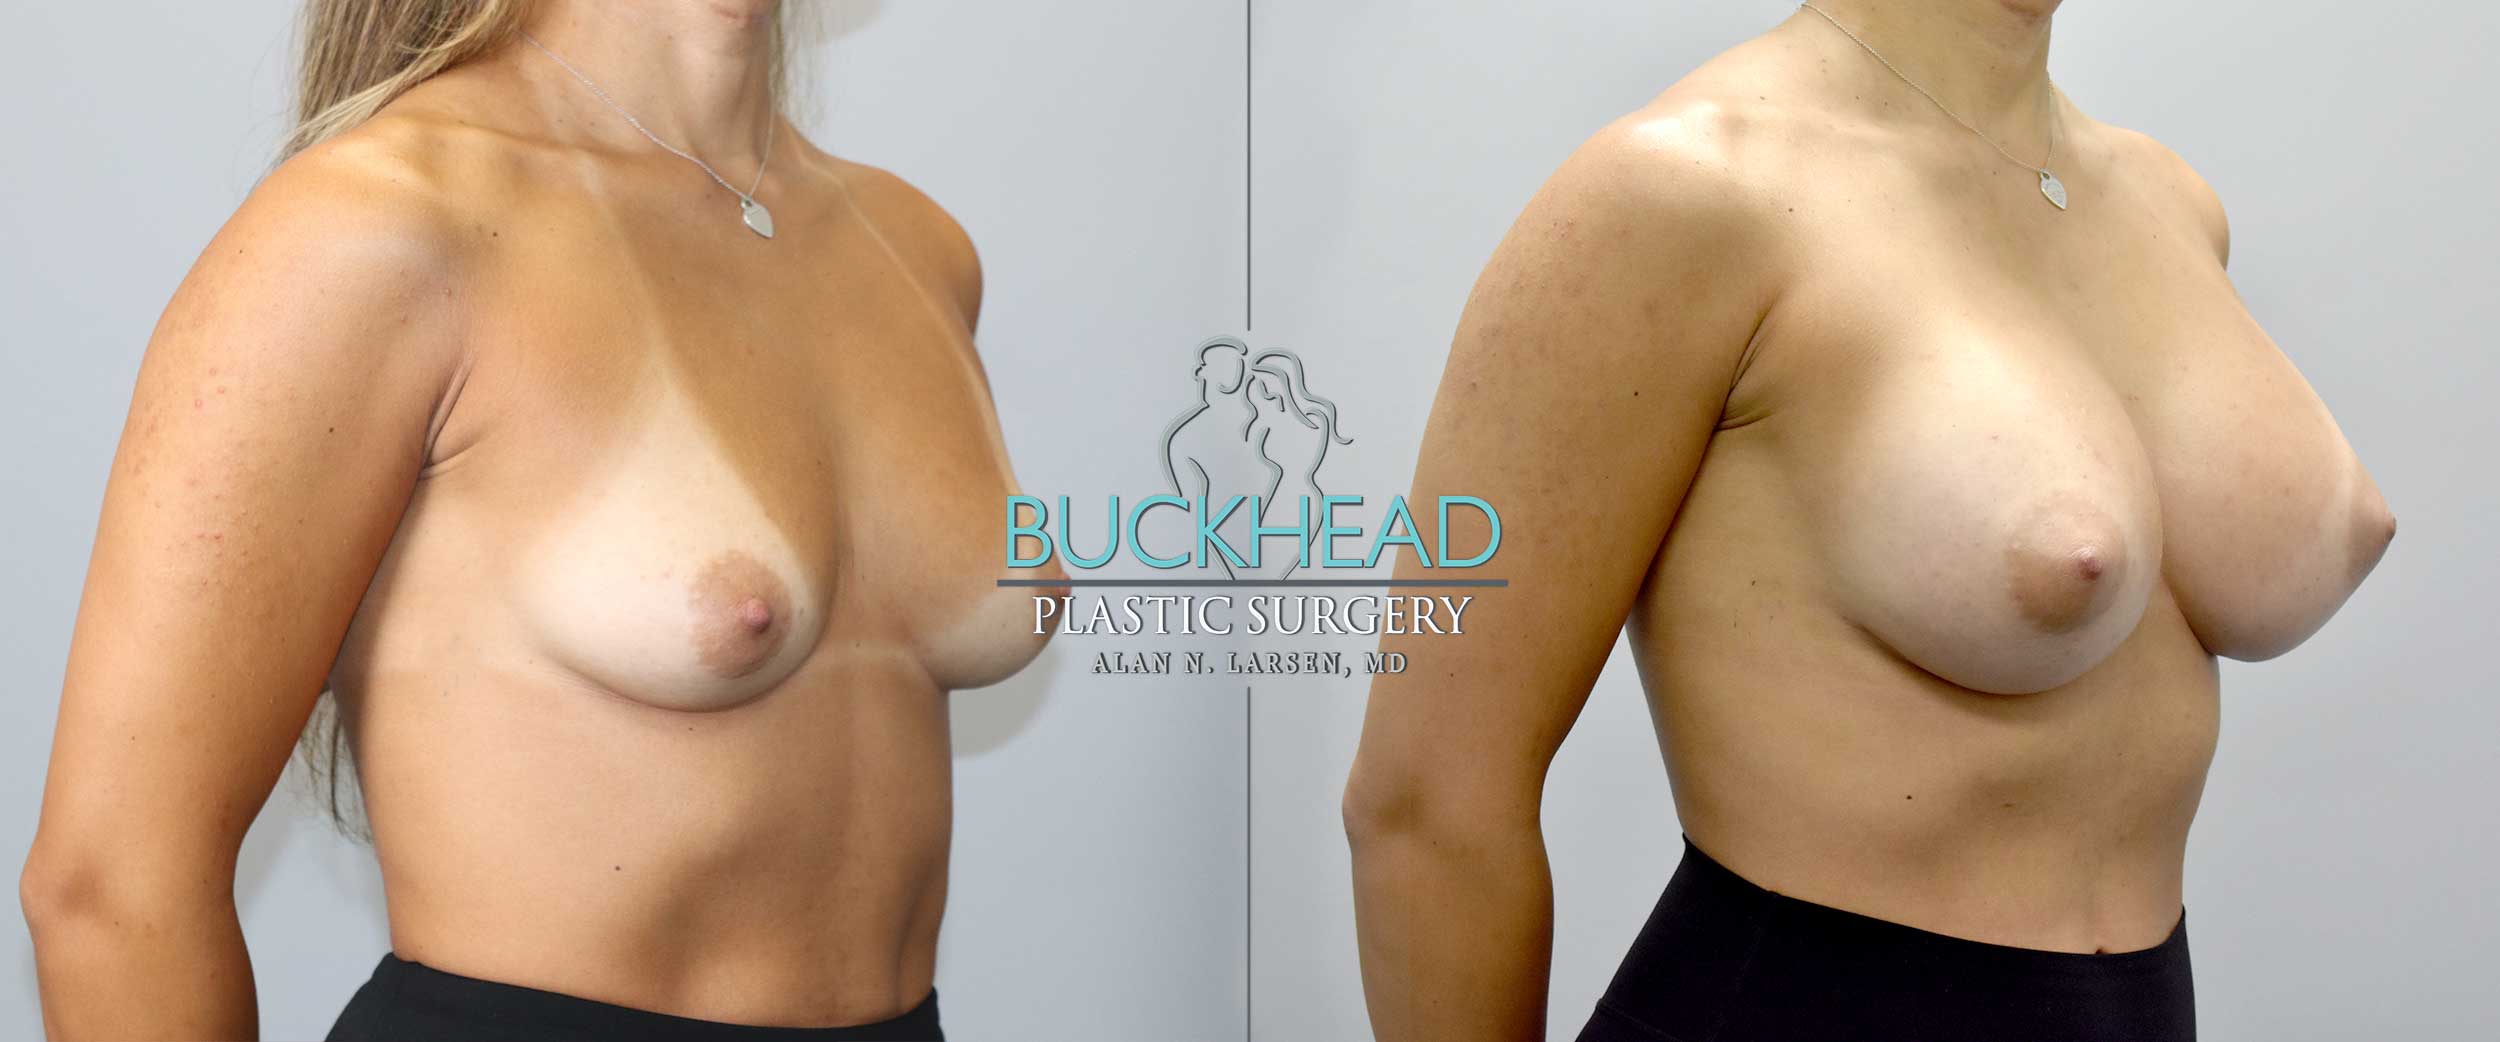 Why Should I Choose Buckhead Plastic Surgery for My Body Lift or Mommy Makeover?